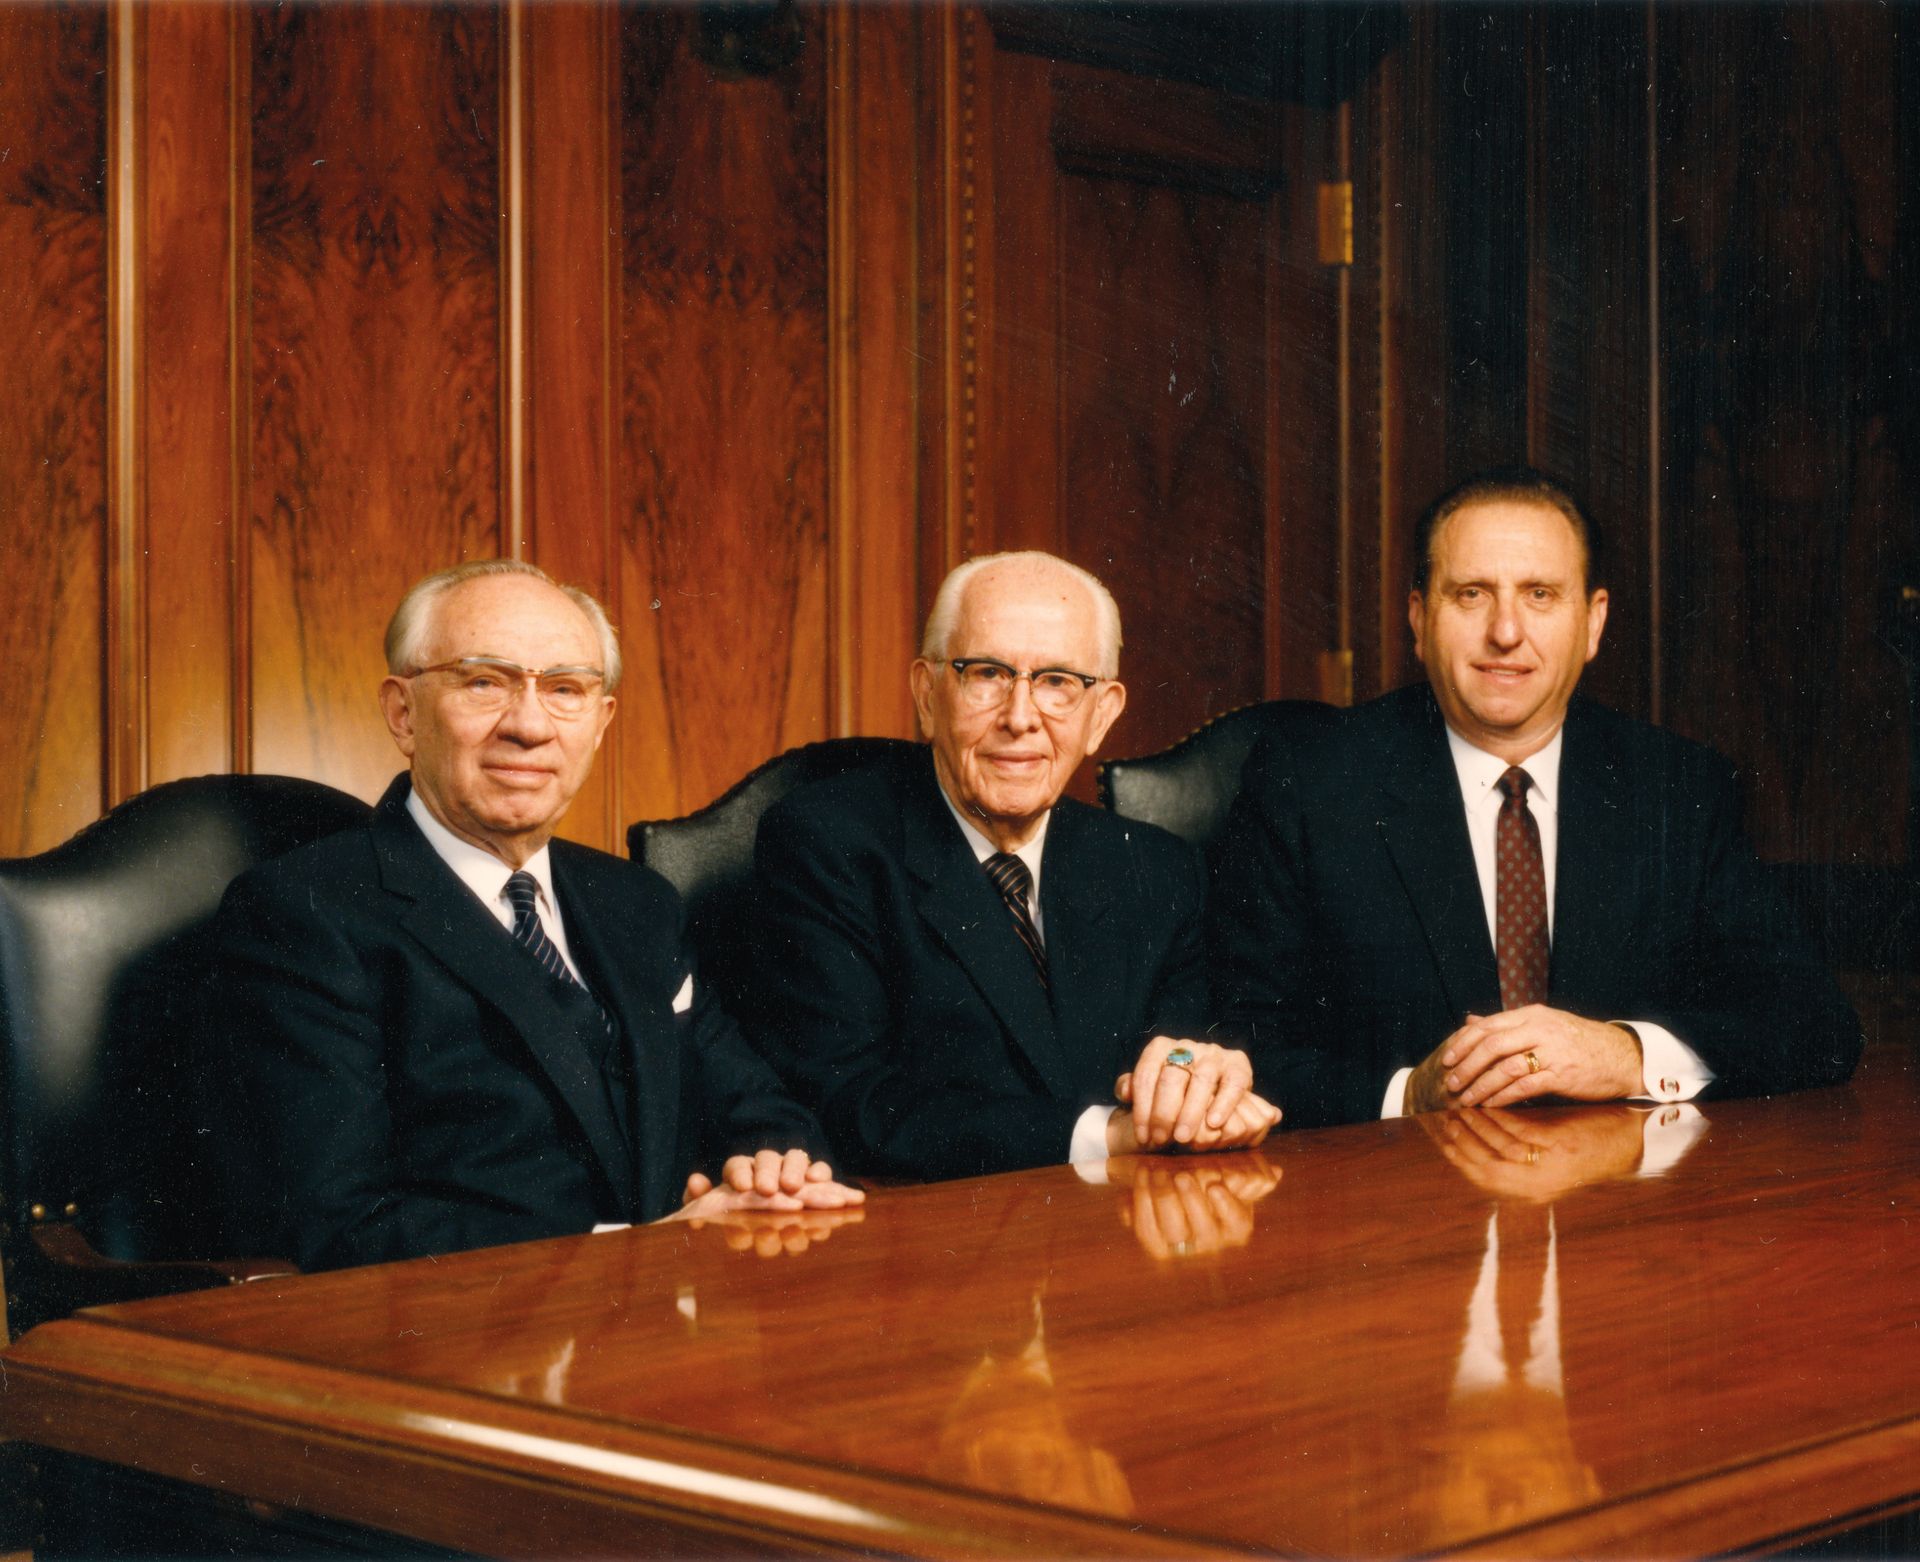 President Benson sitting by his counselors in the First Presidency, President Hinckley and President Monson. Teachings of Presidents of the Church: Ezra Taft Benson (2014), 31